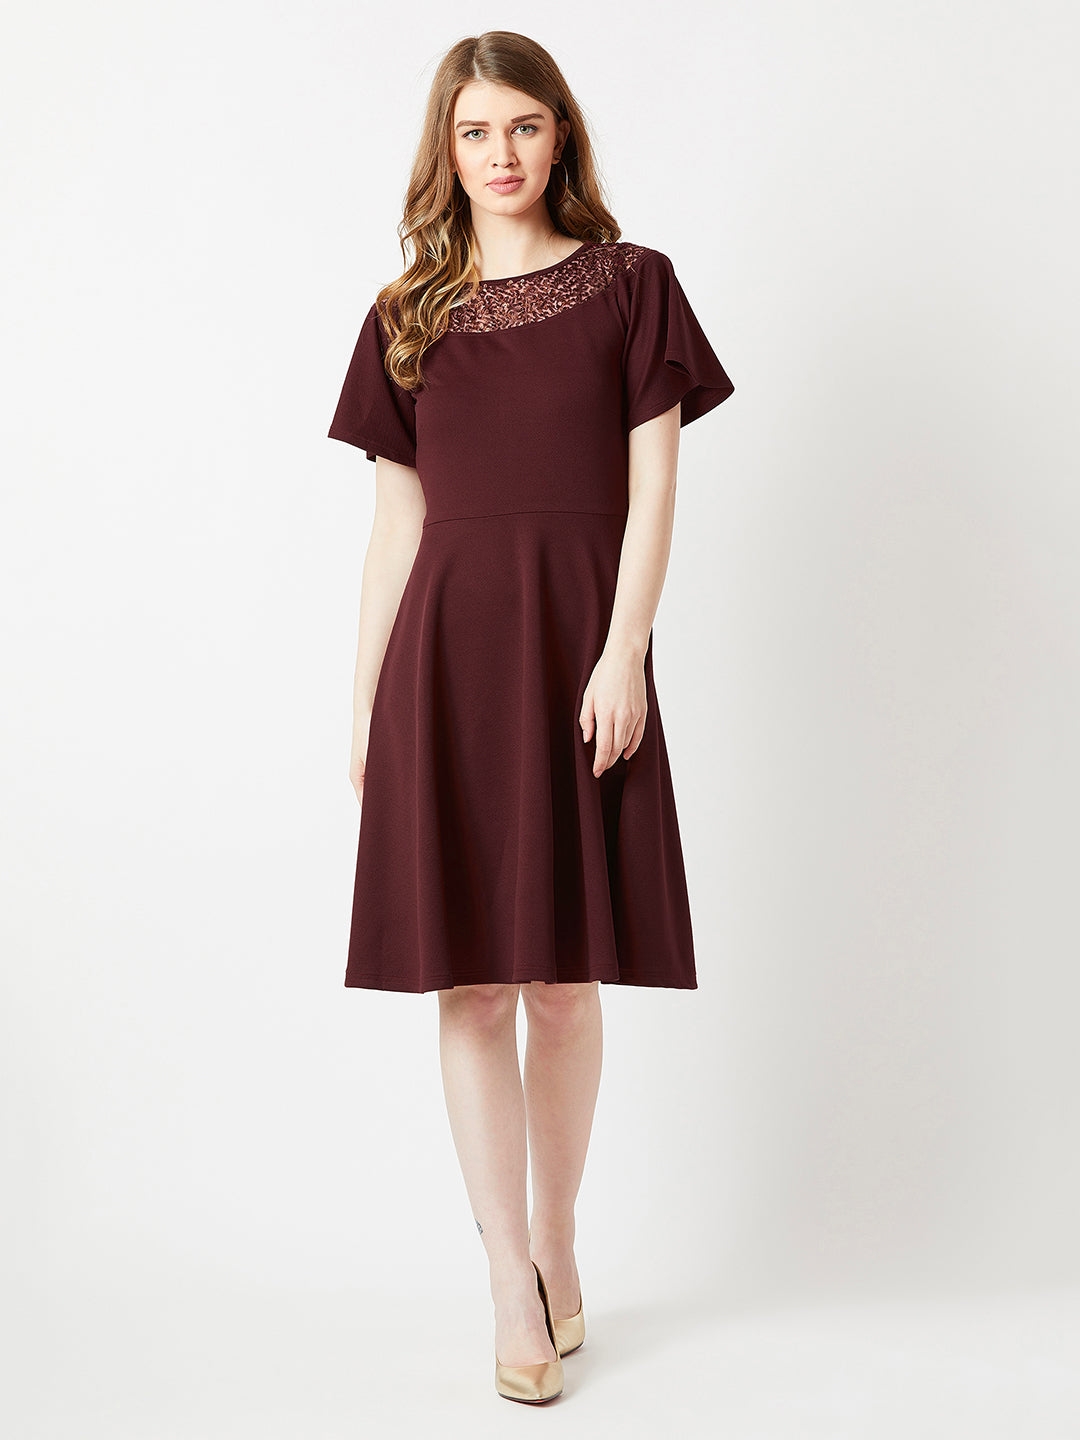 Wine Red Round Neck Flared Short Sleeve Solid Skater Knee-Long Lace Dress